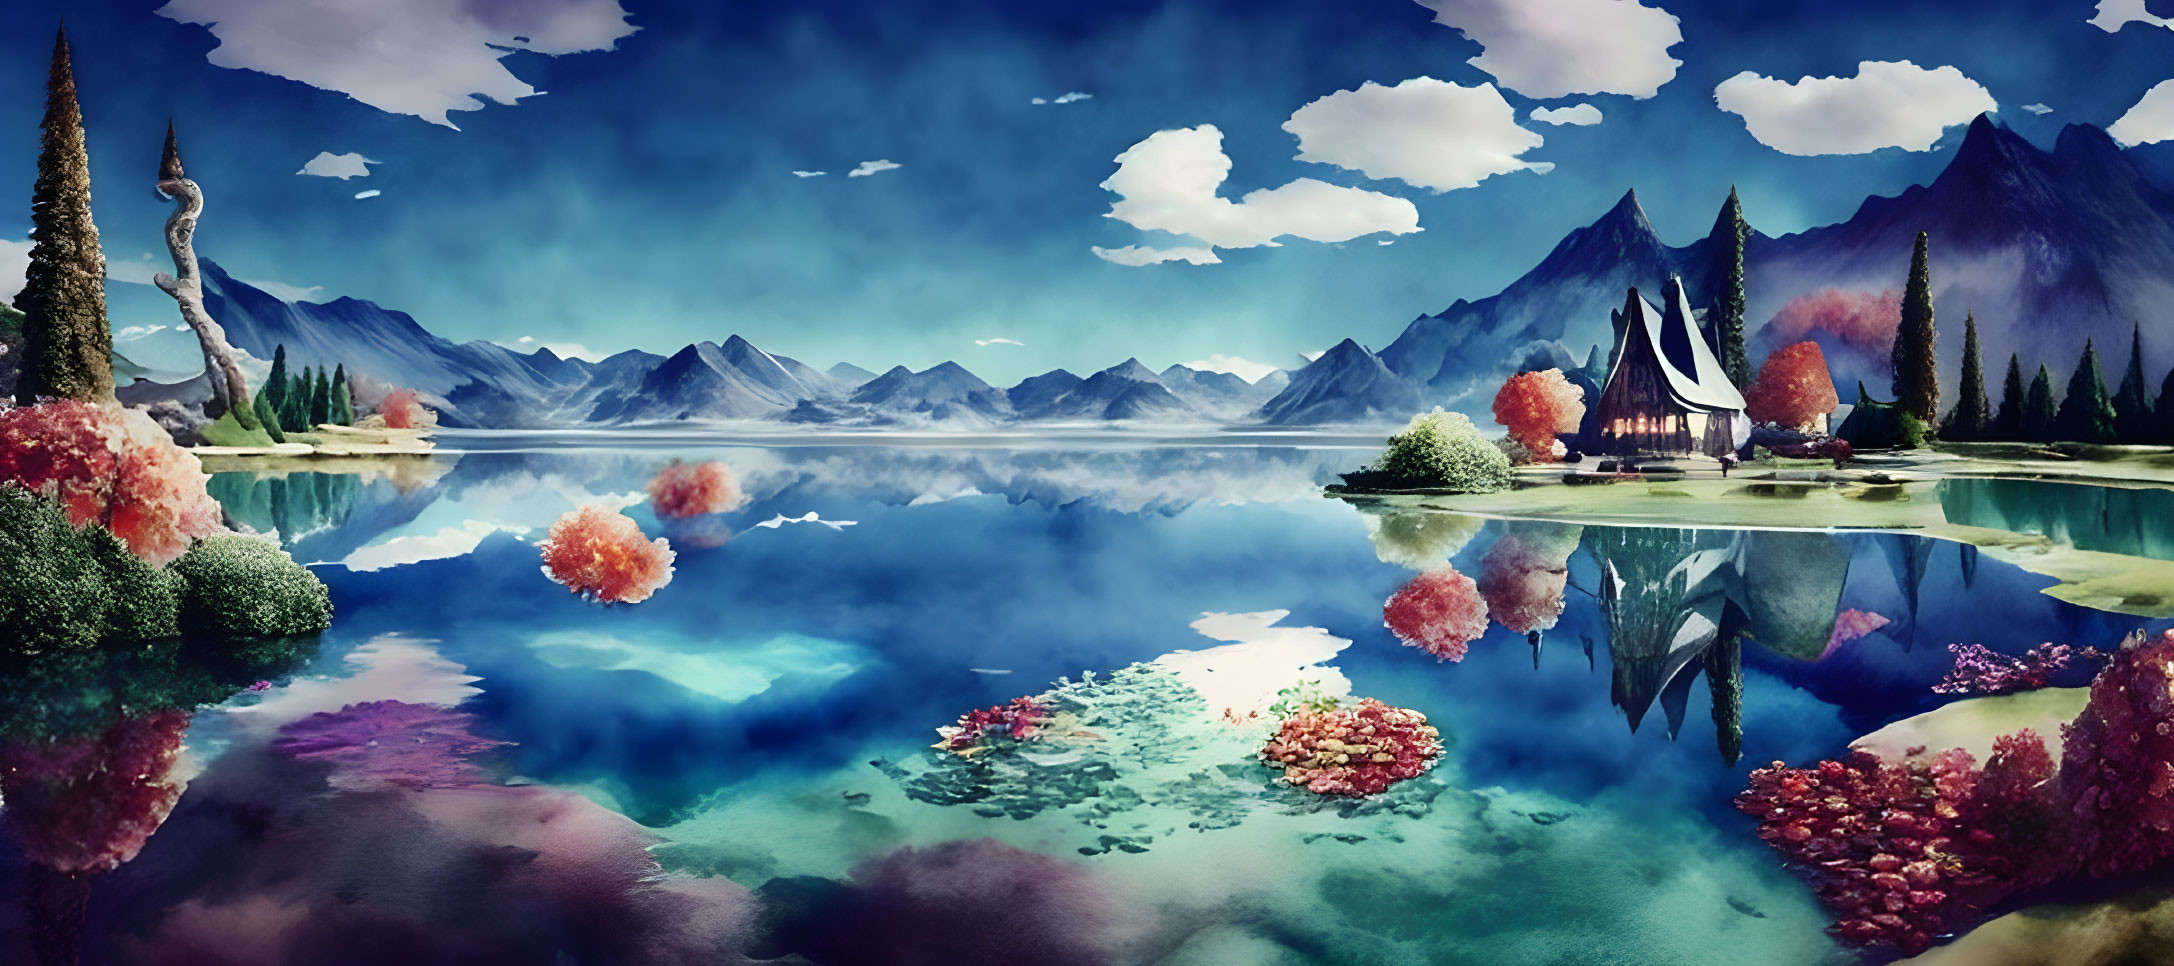 Tranquil landscape with blue waters, mountain peaks, colorful flora, and sailboat-like structure